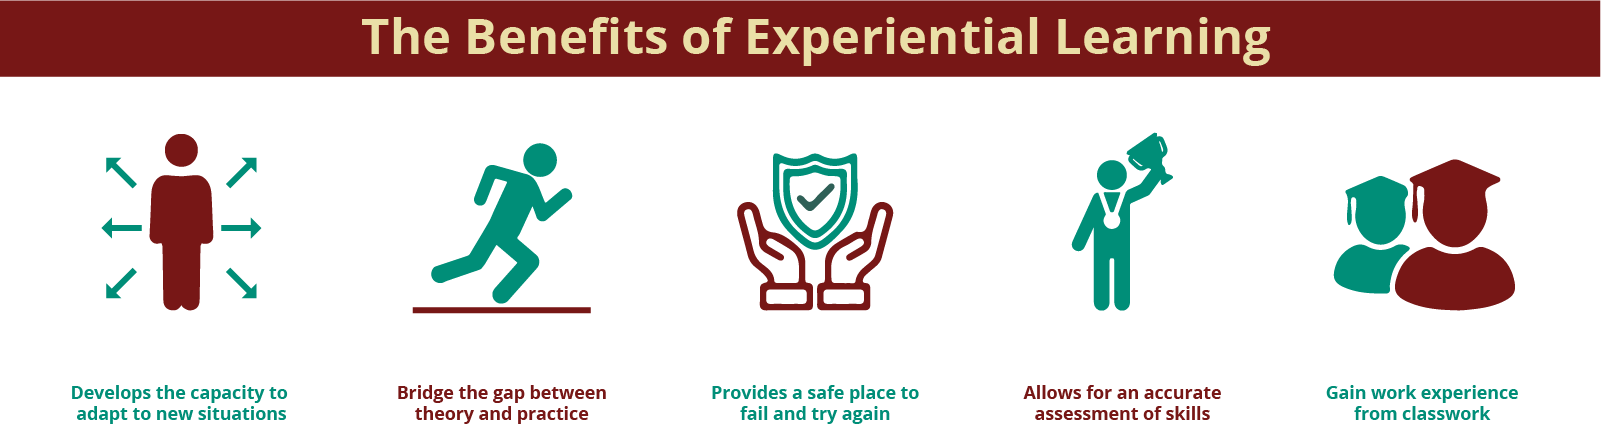 Benefits of experiential learning